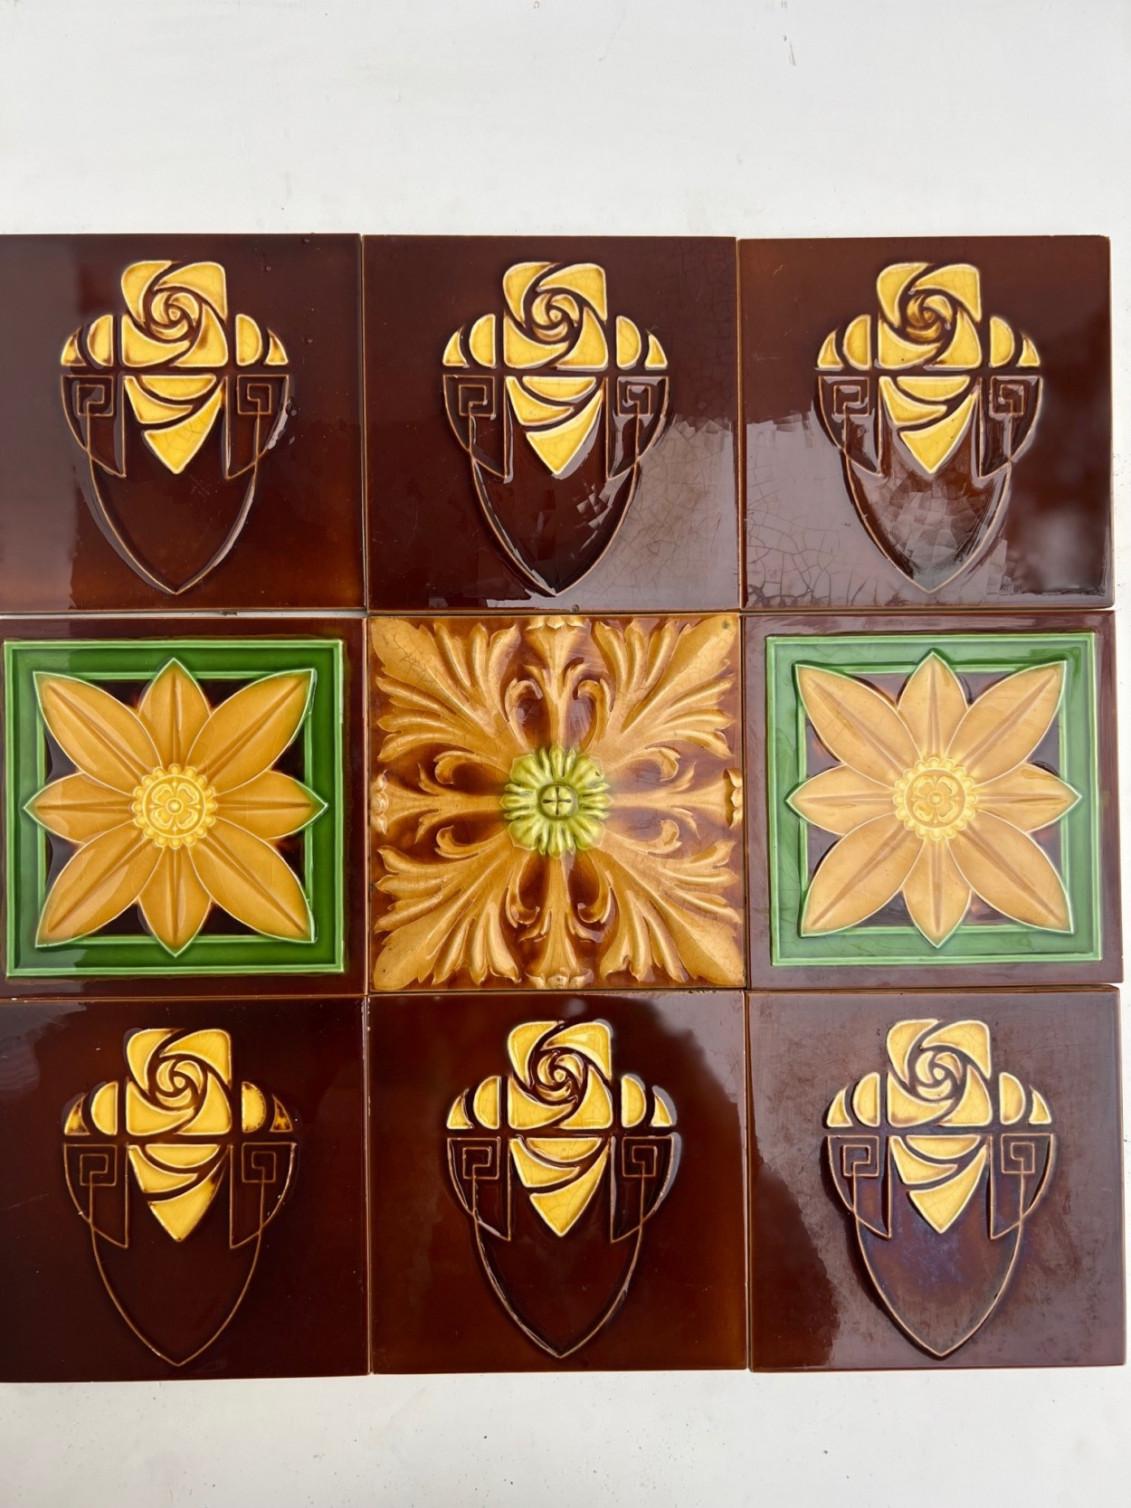 Mixed handmade tiles in rich brown, green and yellow glazed colors. Manufactured around 1920 by Gilliot Hemiksem, Belgium.
These tiles would be charming displayed on easels, framed or incorporated into a custom tile design.

Please note that the